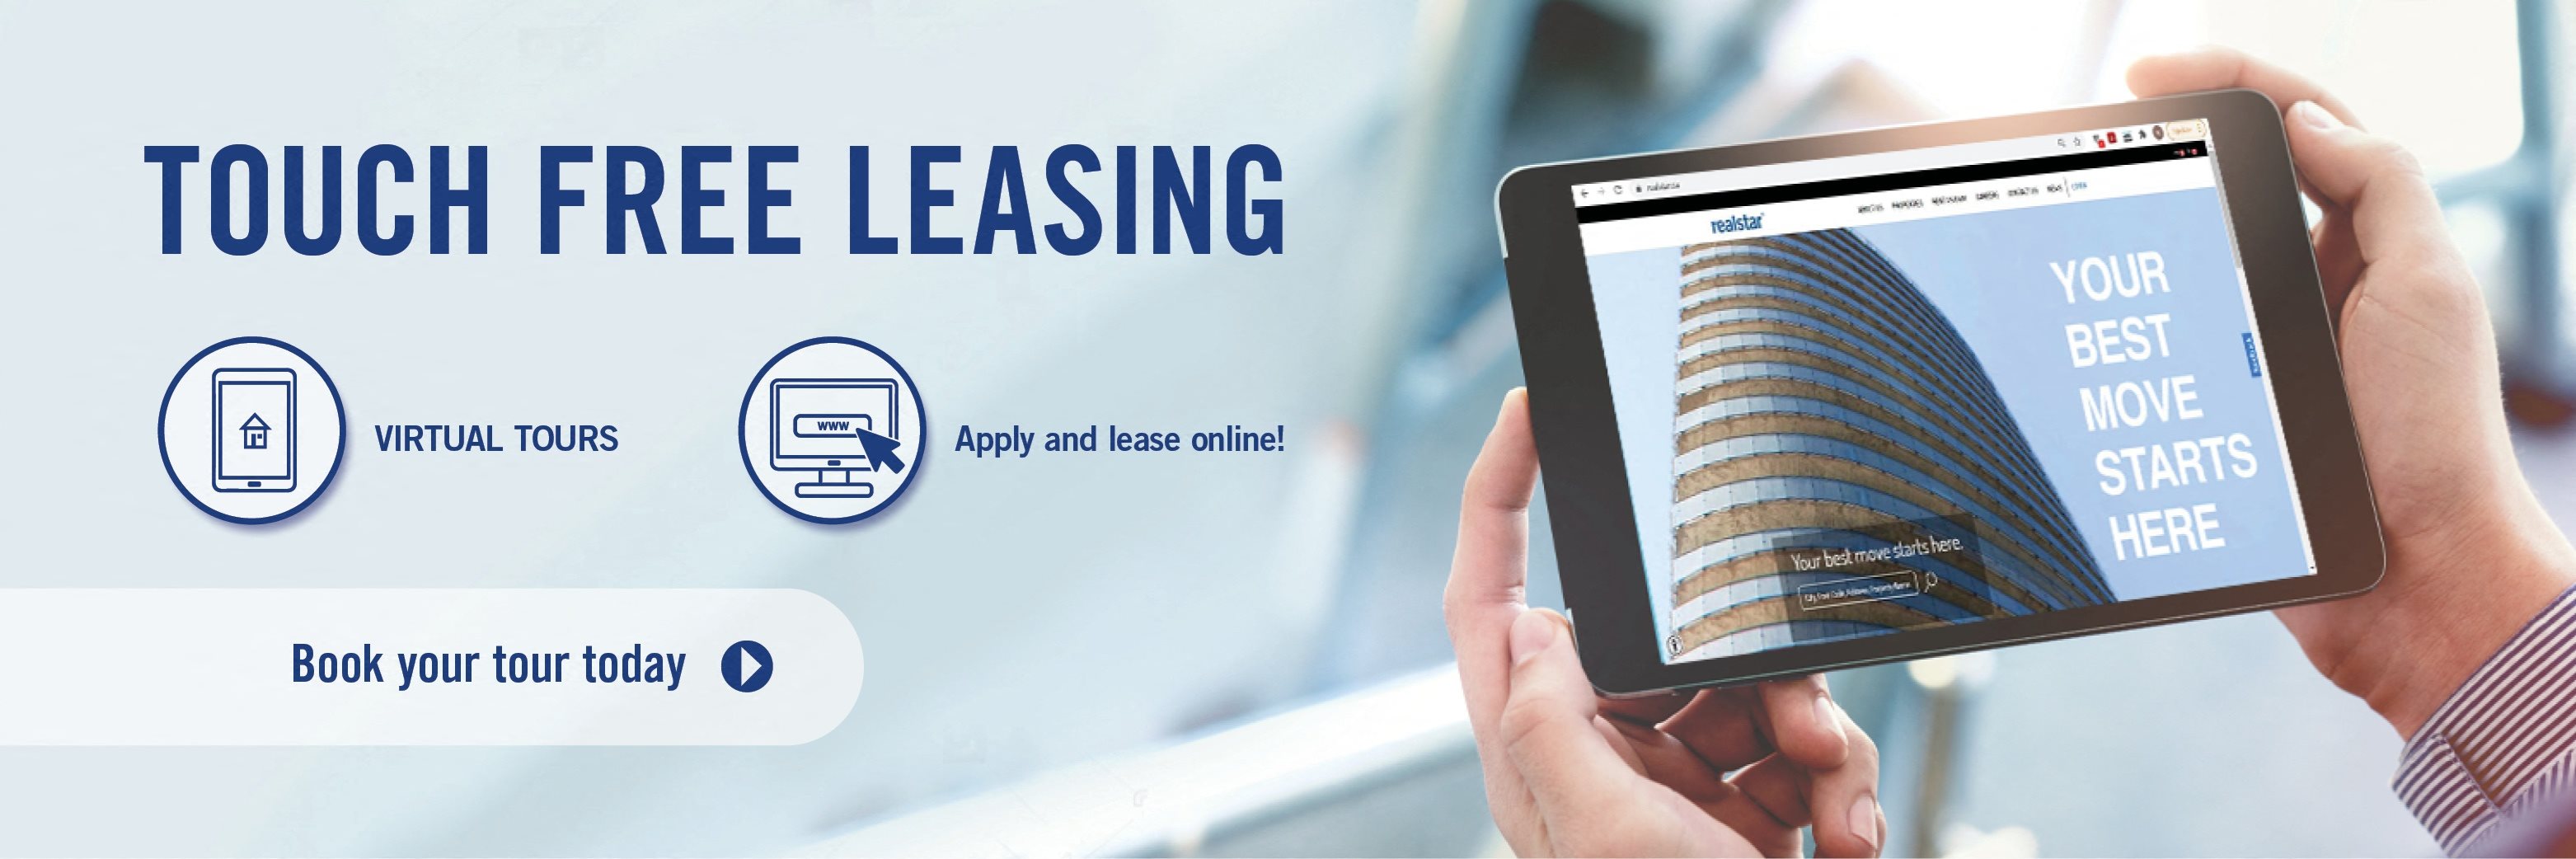 Virtual Leasing - offering virtual tours, apply and lease online